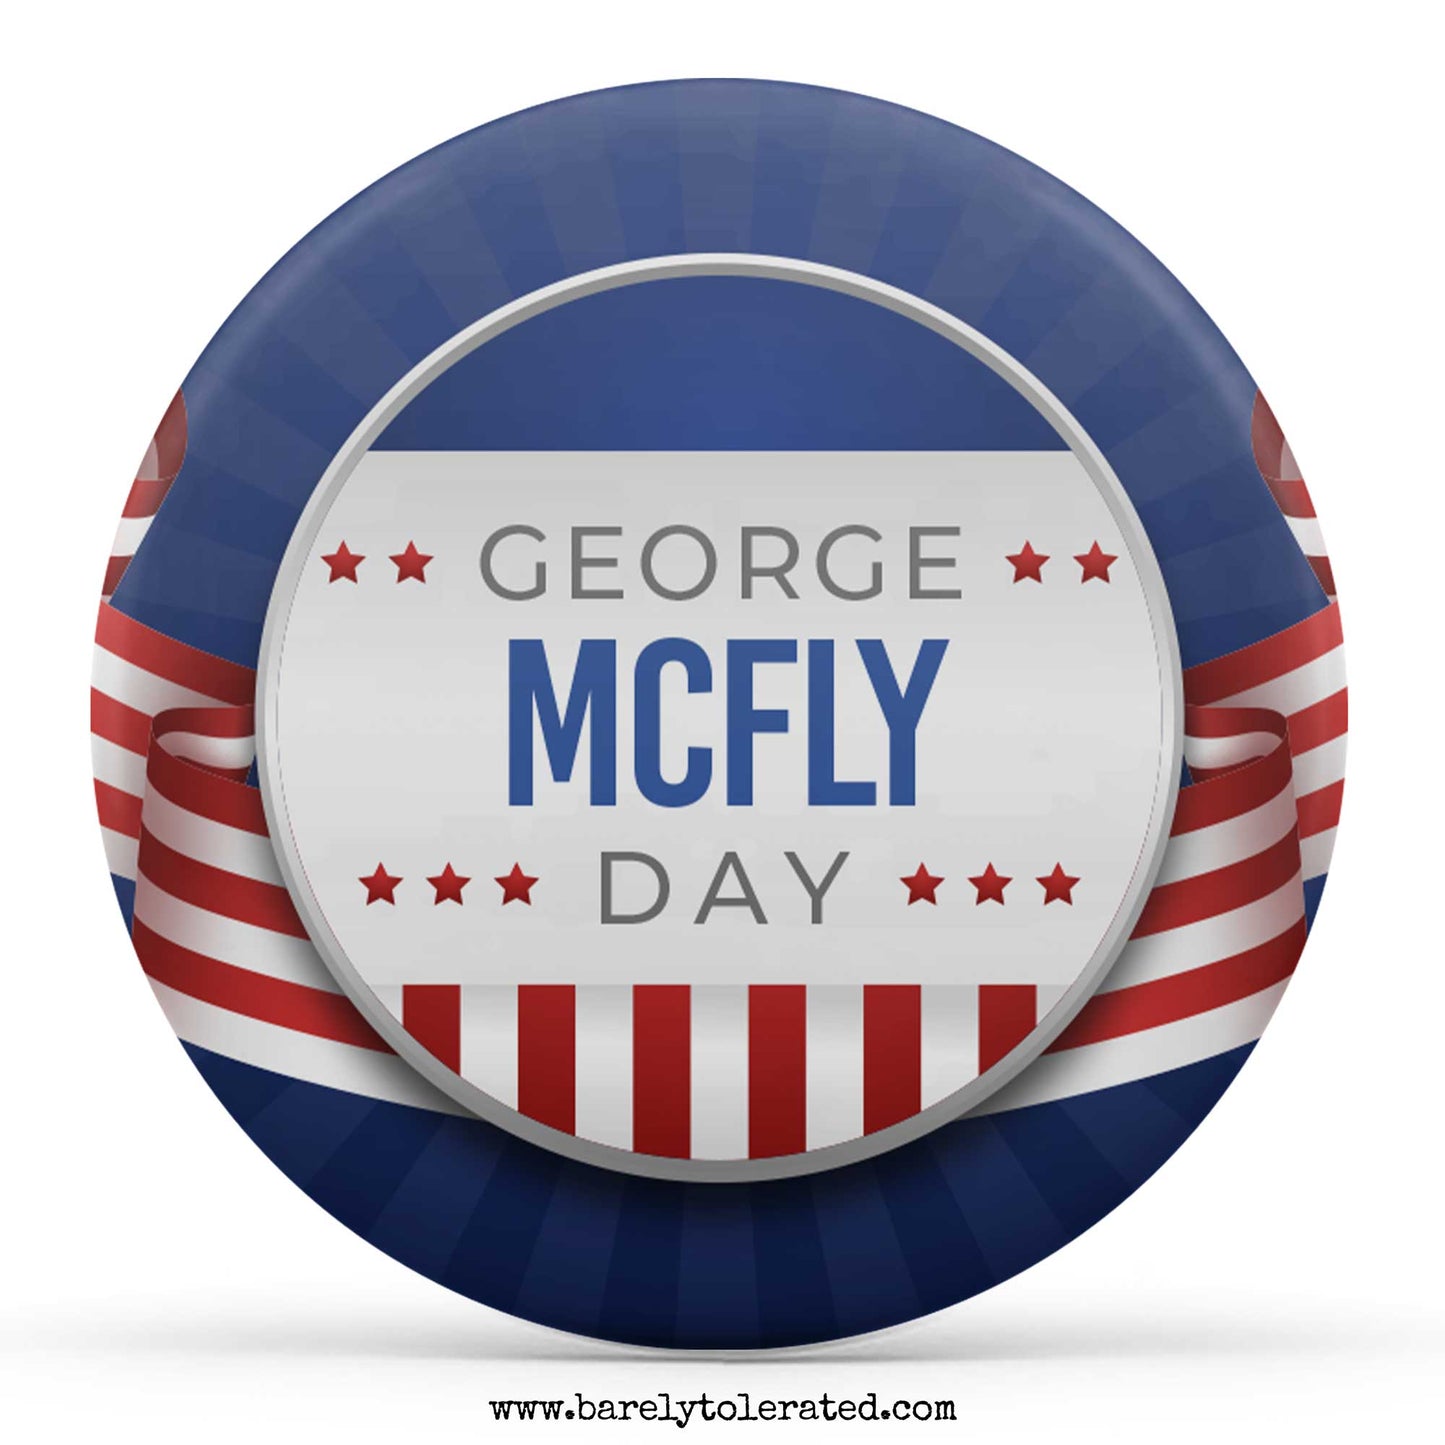 George McFly Day